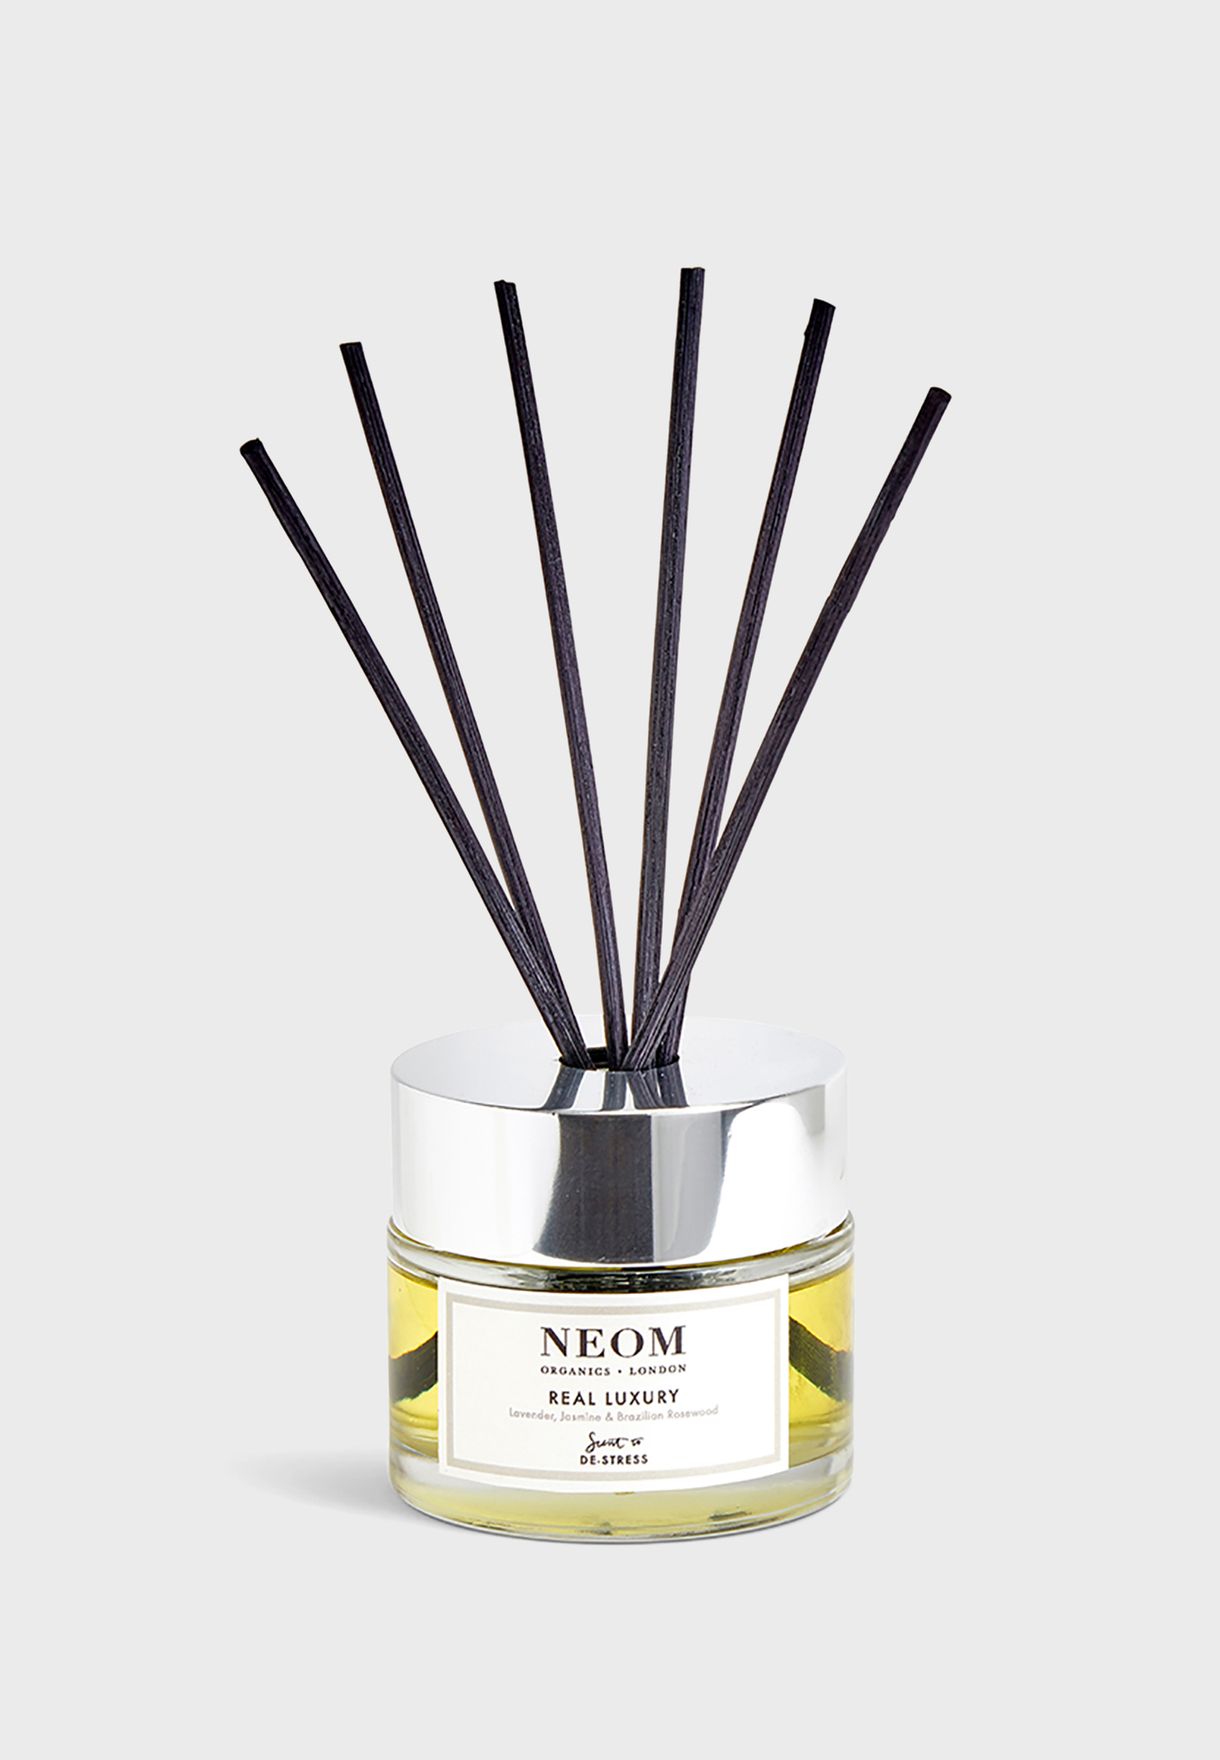 Real Luxury Reed Diffuser 100Ml